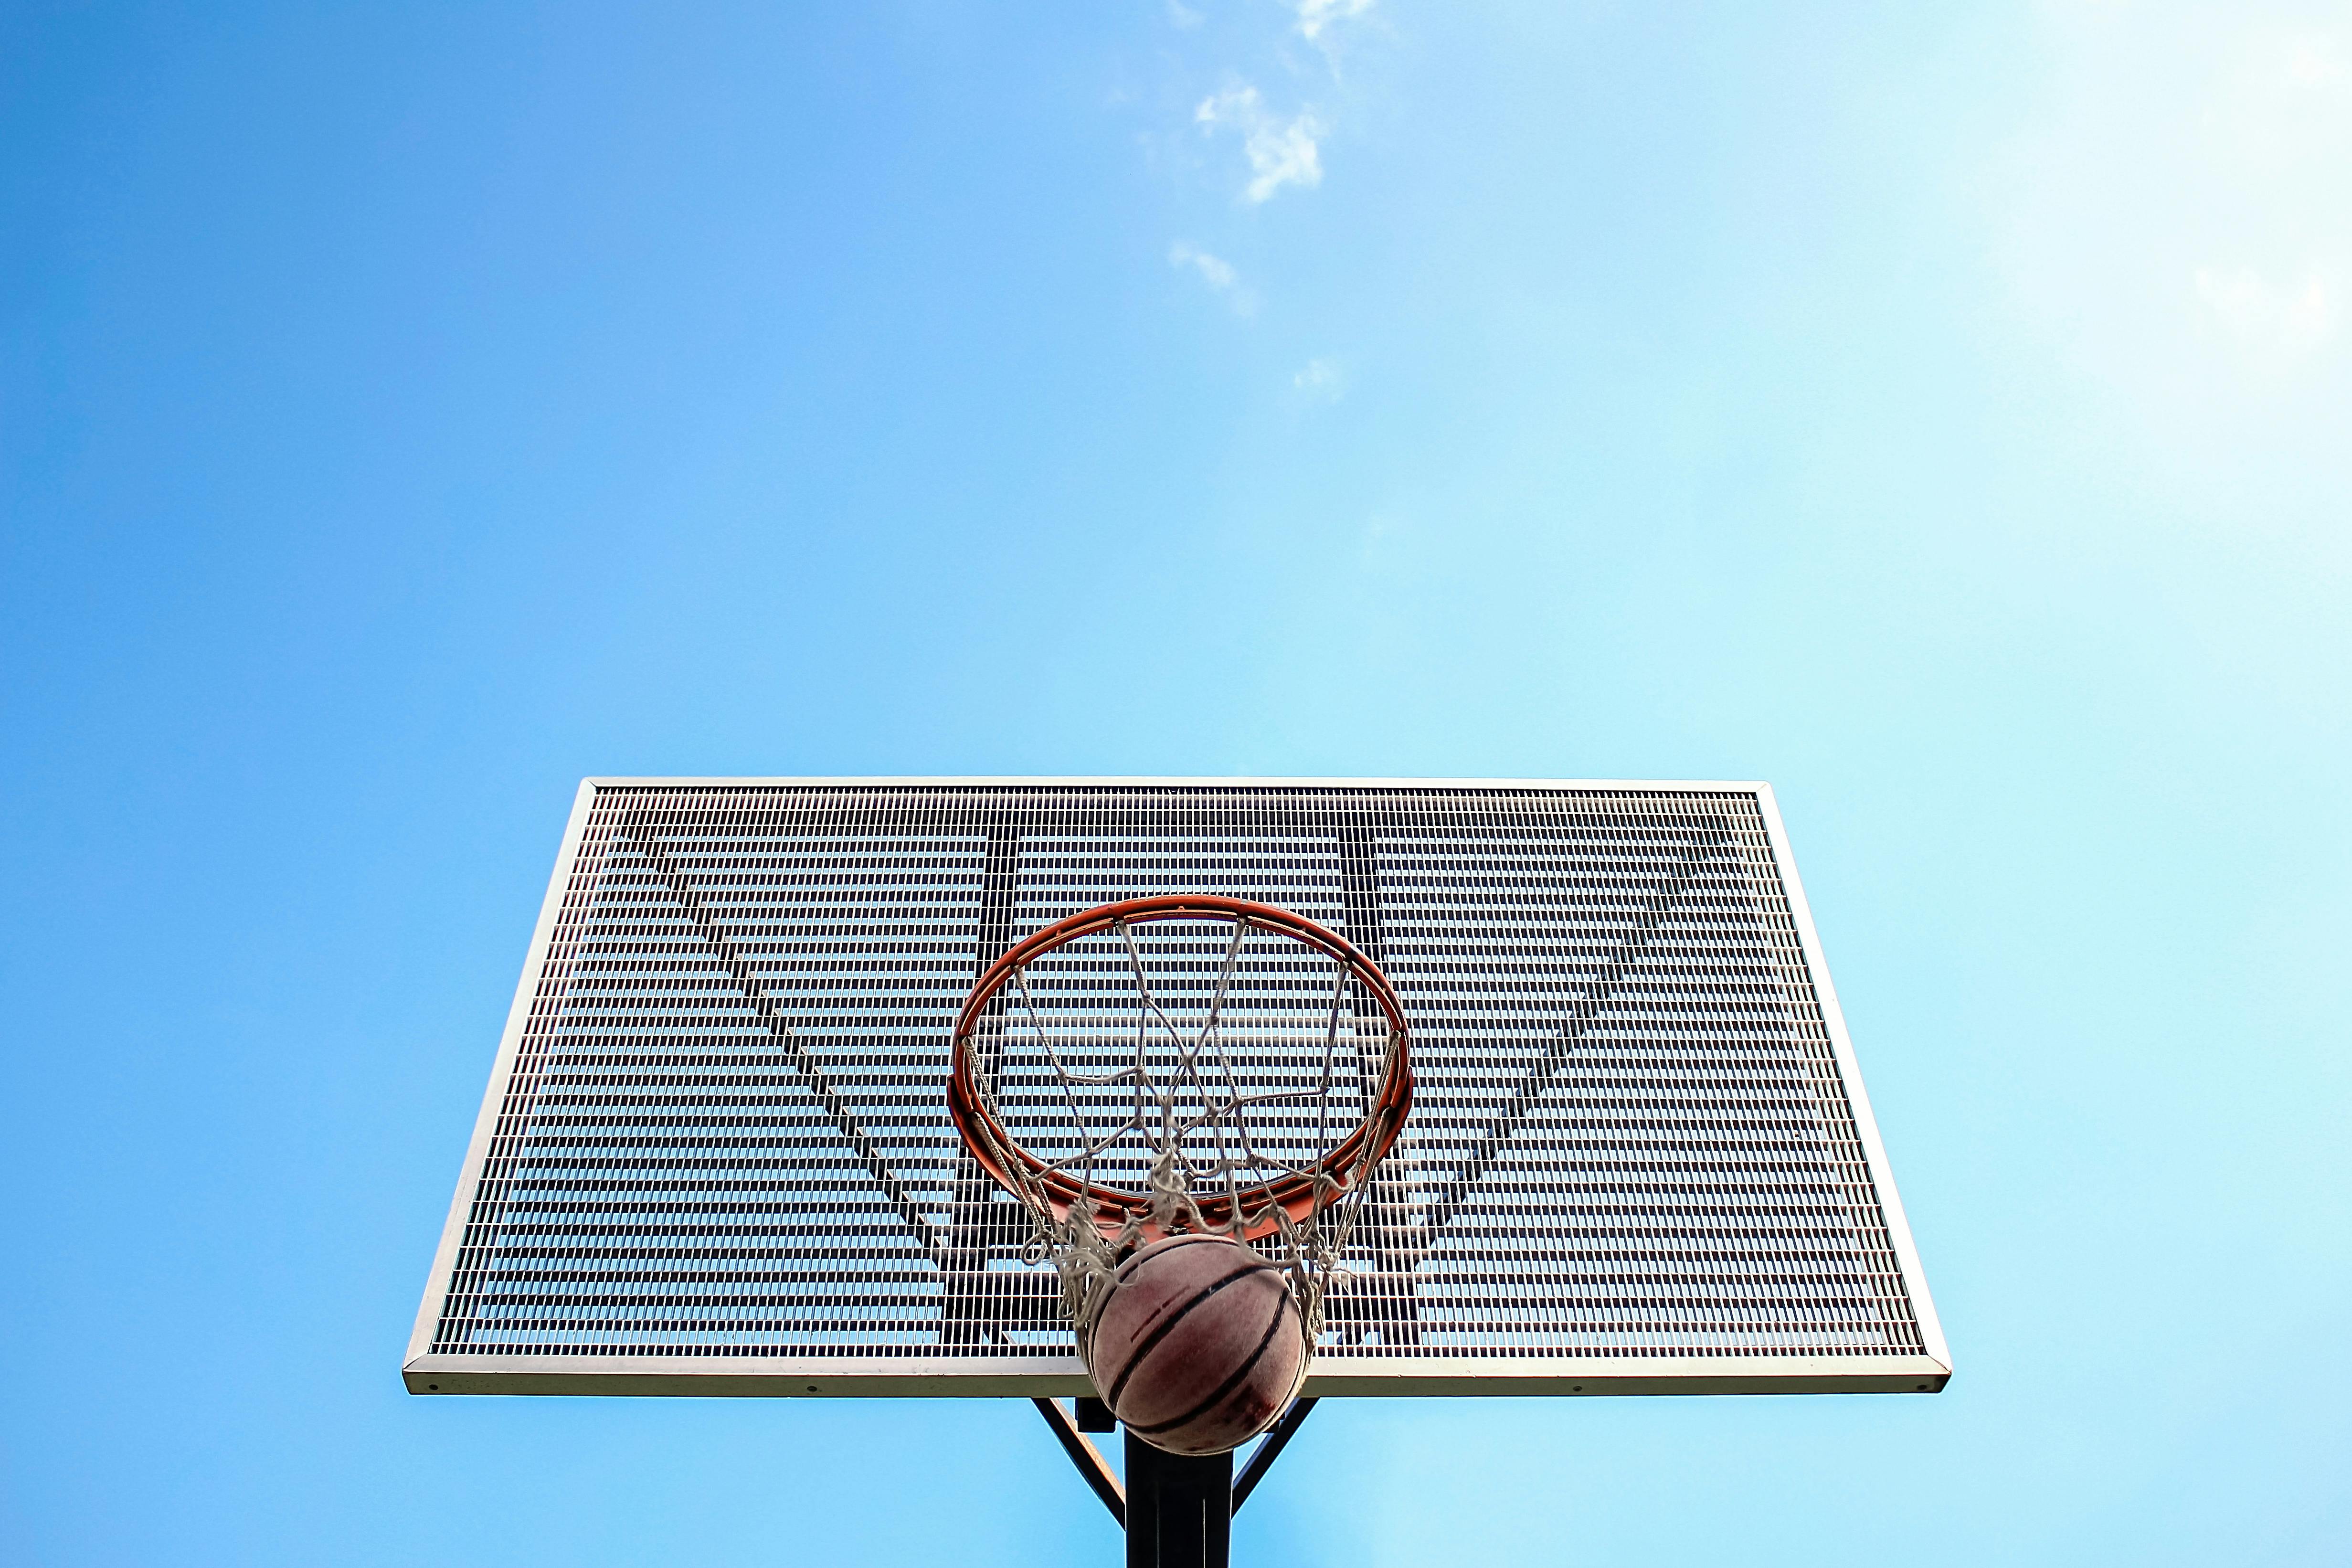 low angle shot of a ball going inside a hoop